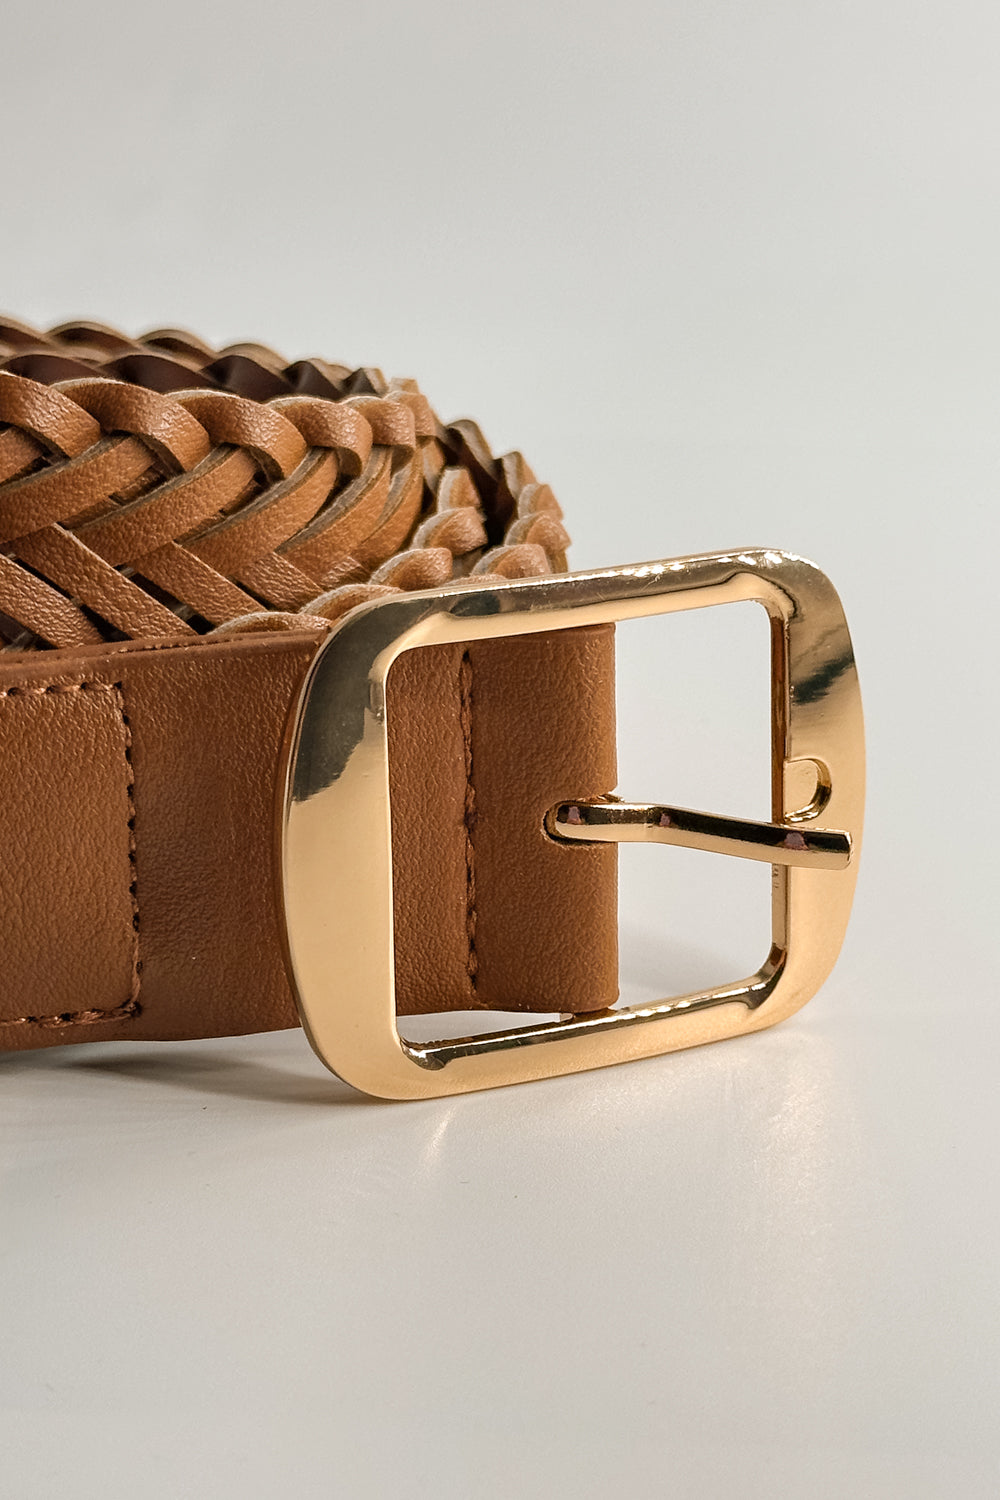 Close up view of the Everly Braided Adjustable Belt in Brown which features brown Leather Fabric, Braided Details, Gold Adjustable Buckle